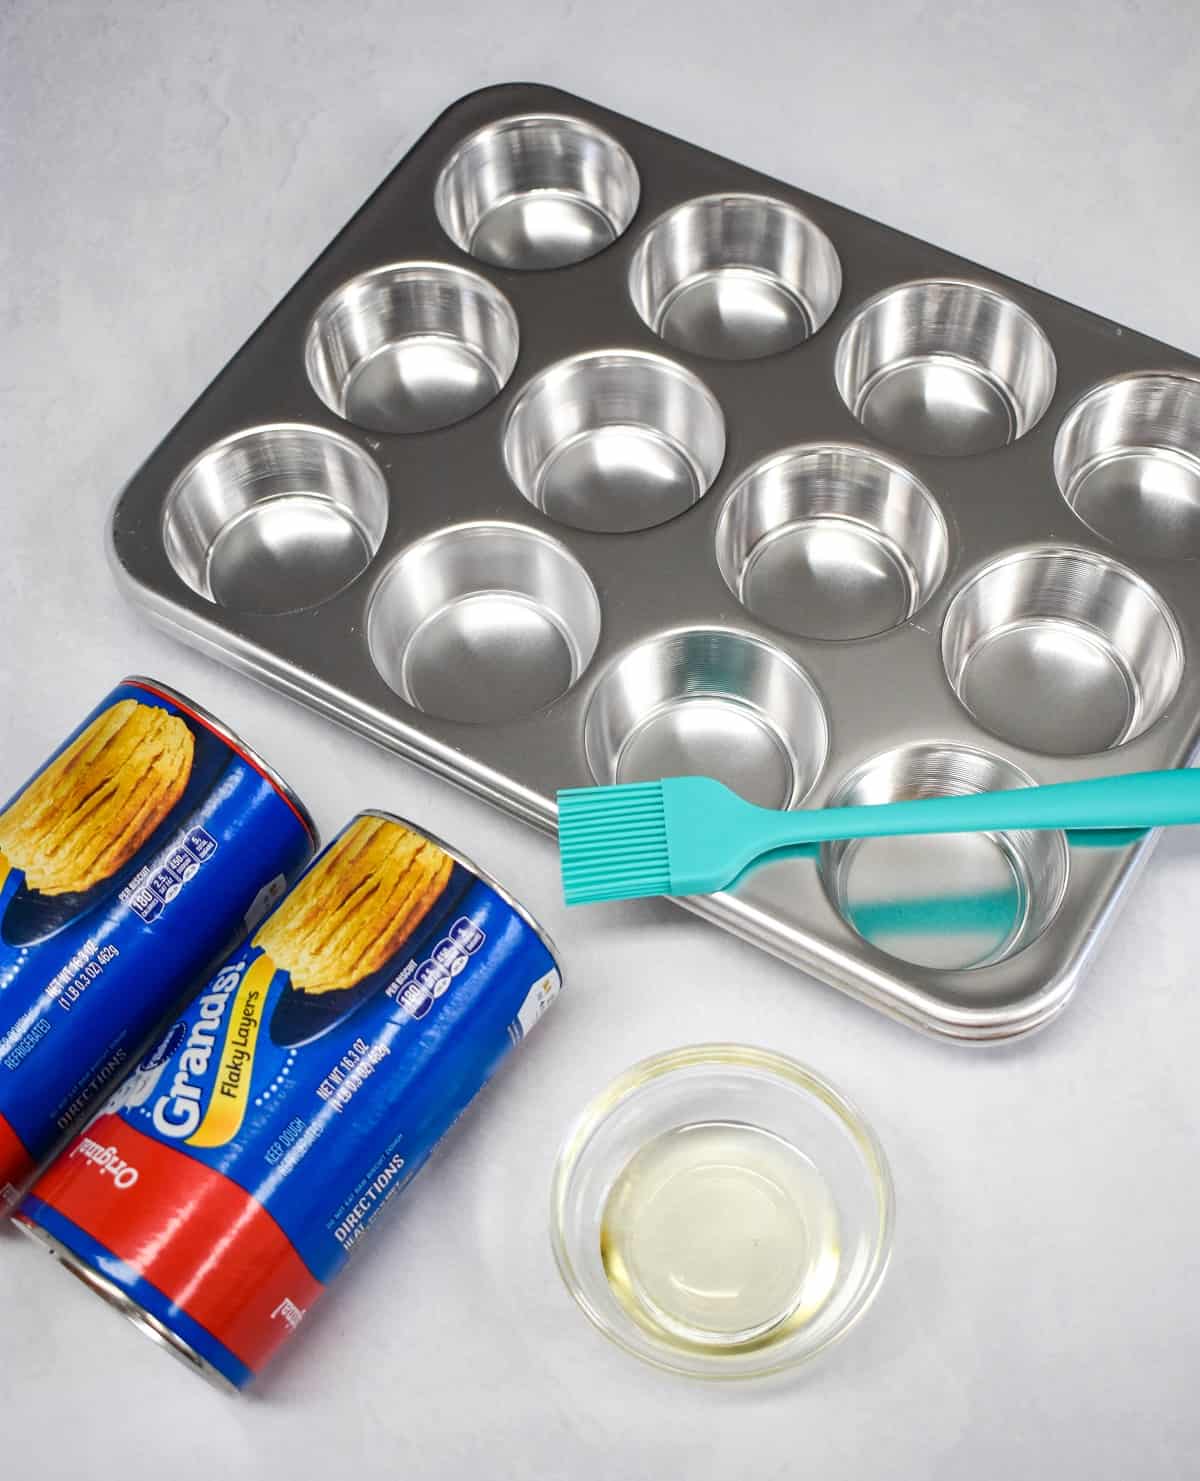 Two packages of refrigerated biscuits, muffin pan, oil in a small glass bowl, and a pastry brush.